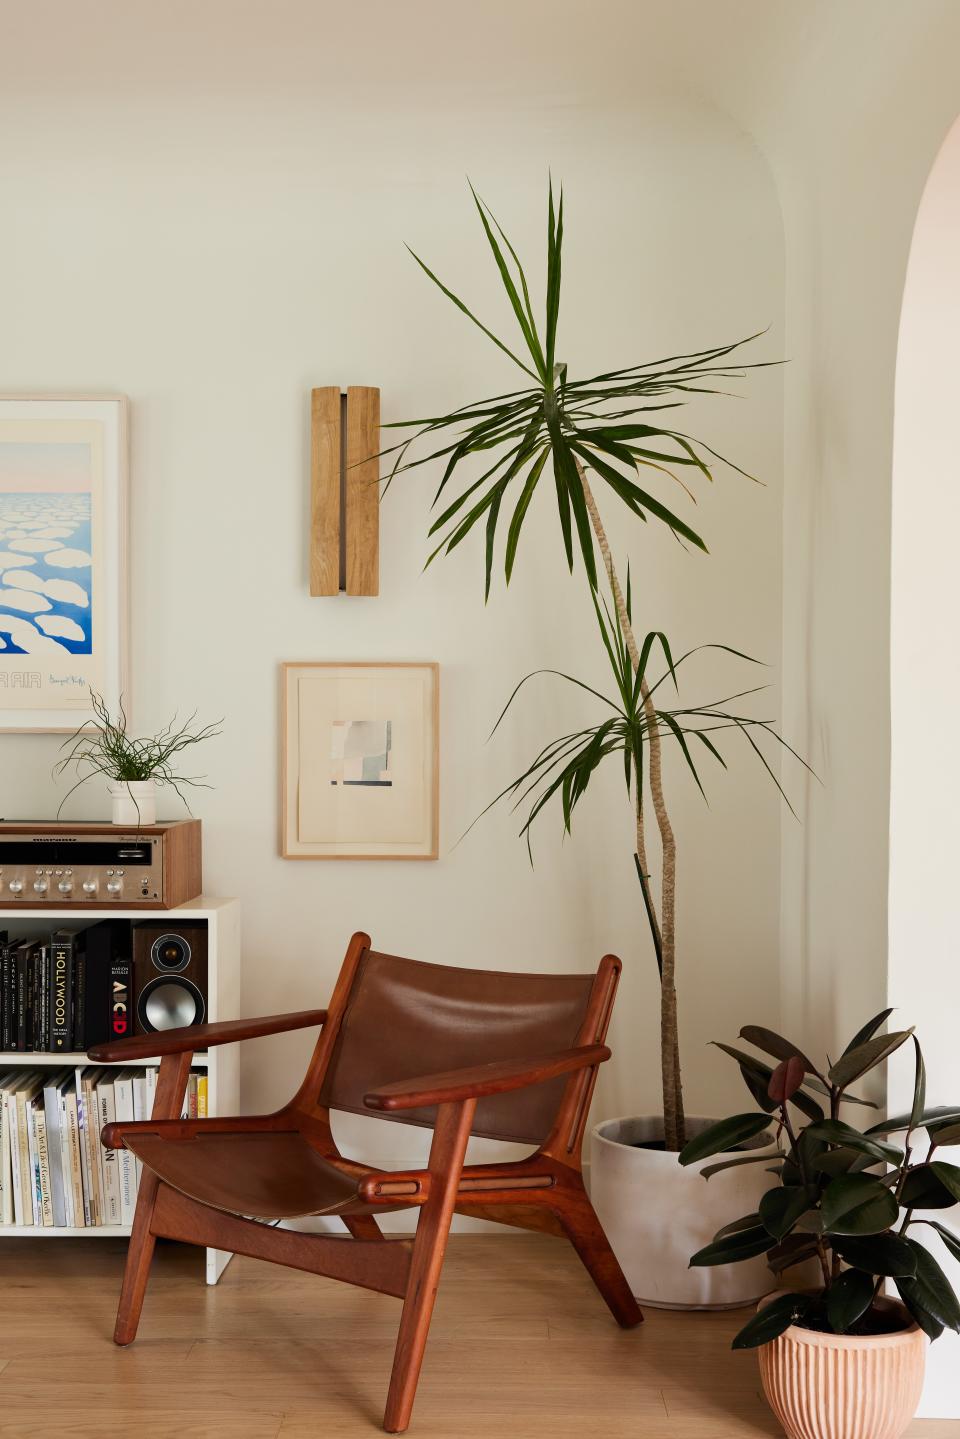 One corner of the living room is reserved for quiet contemplation. The chair is the Lars design by Room & Board. Ravenhill Studio’s ADA oak sconce, plus a small watercolor by Claire Oswalt and an artwork by Georgia O’Keeffe (partially seen above bookshelf), punctuate the wall above.